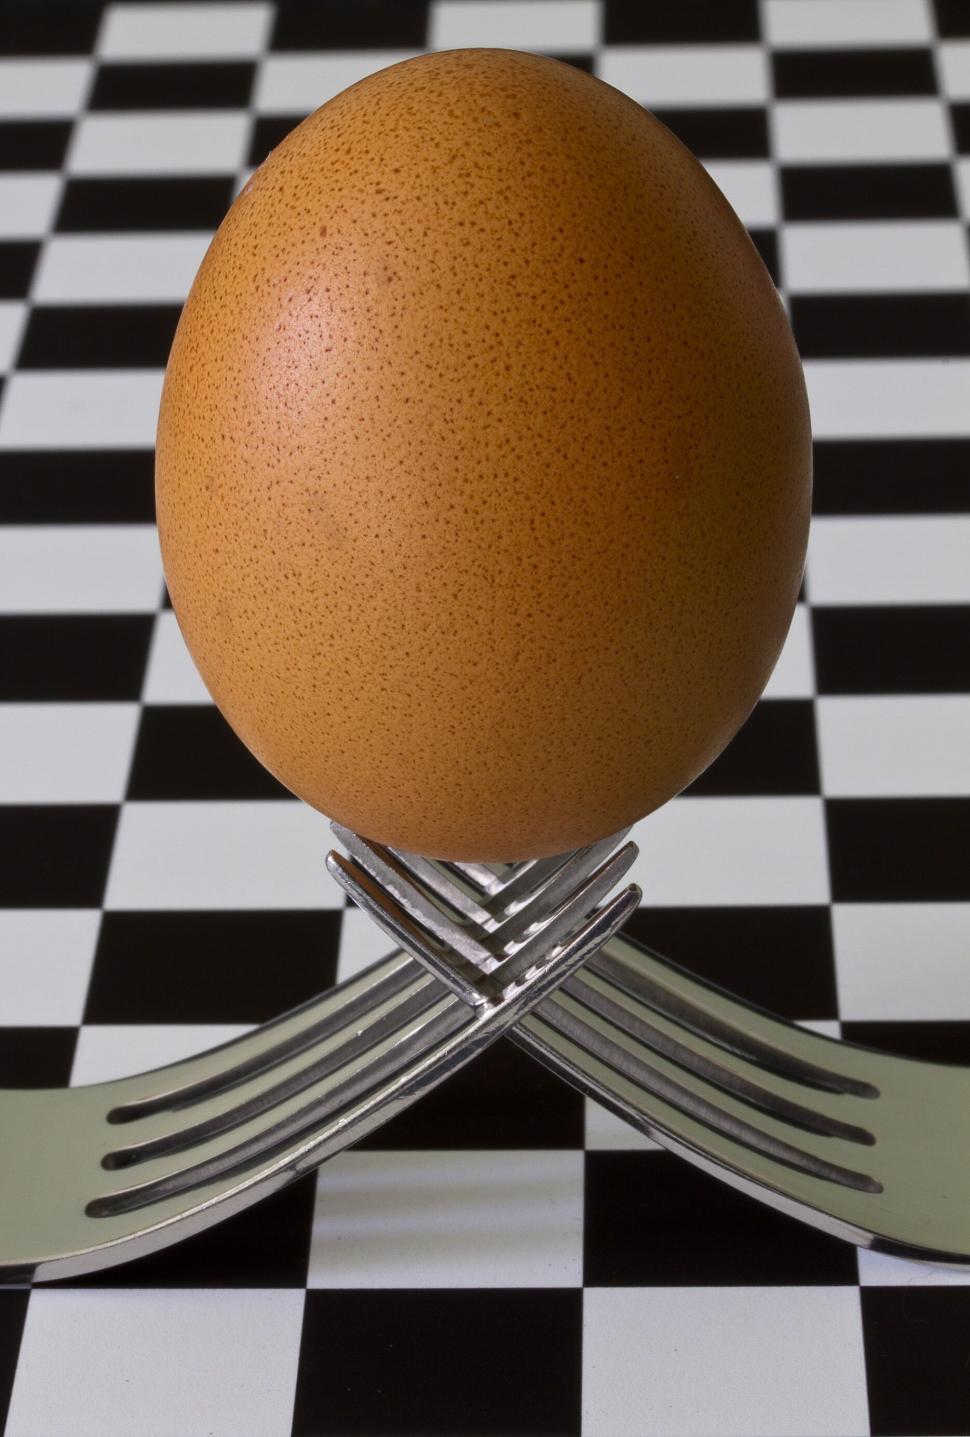 Free Image of Egg balanced on crossed forks over checkered background 